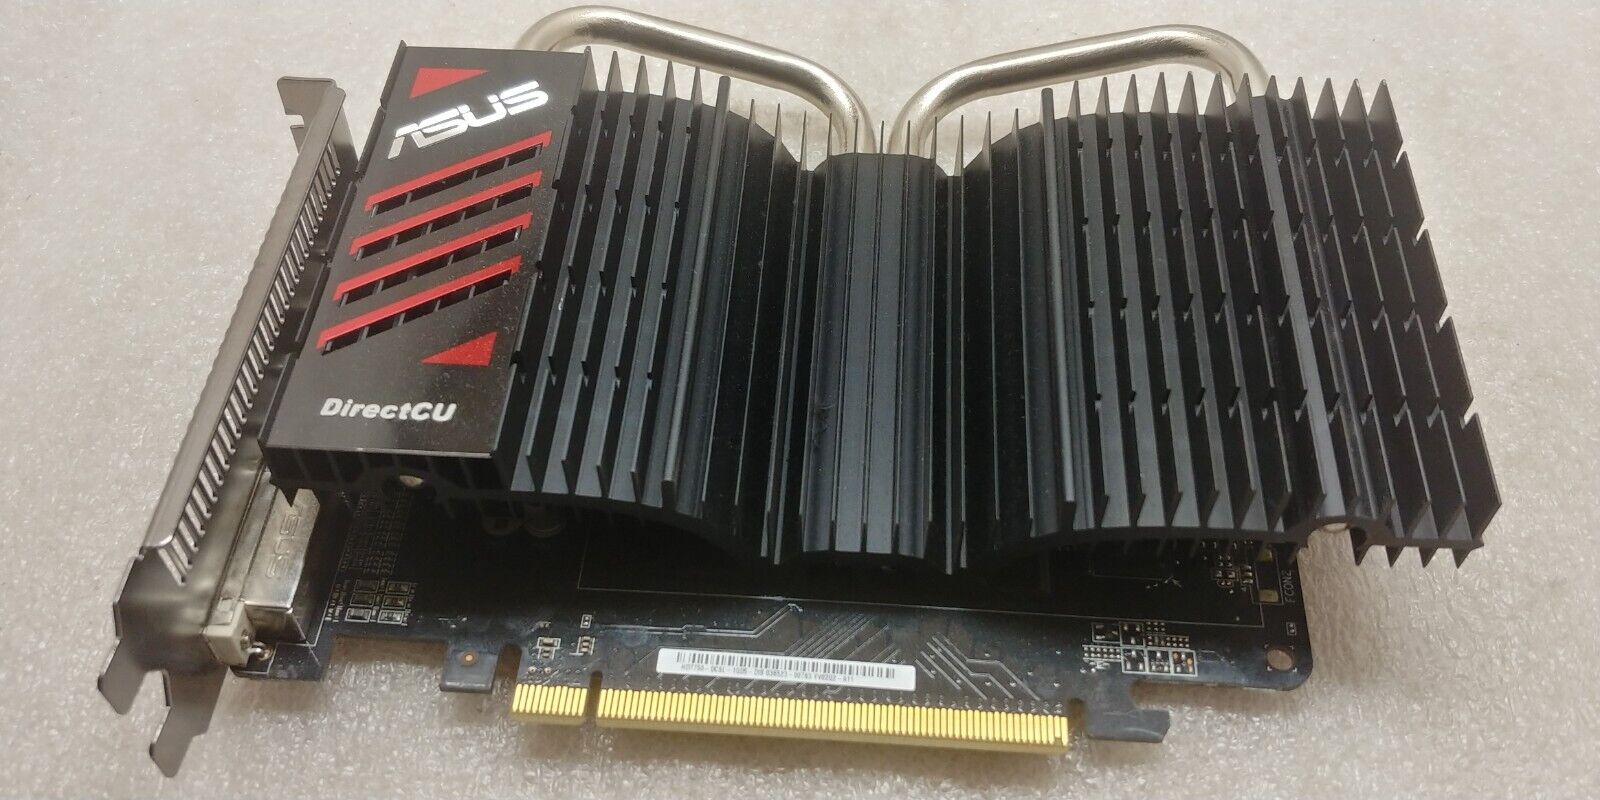 ASUS DIRECTCU HD7750-DCSL-1GD5 SILENCE PCIE GRAPHICS CARD GREAT COND 